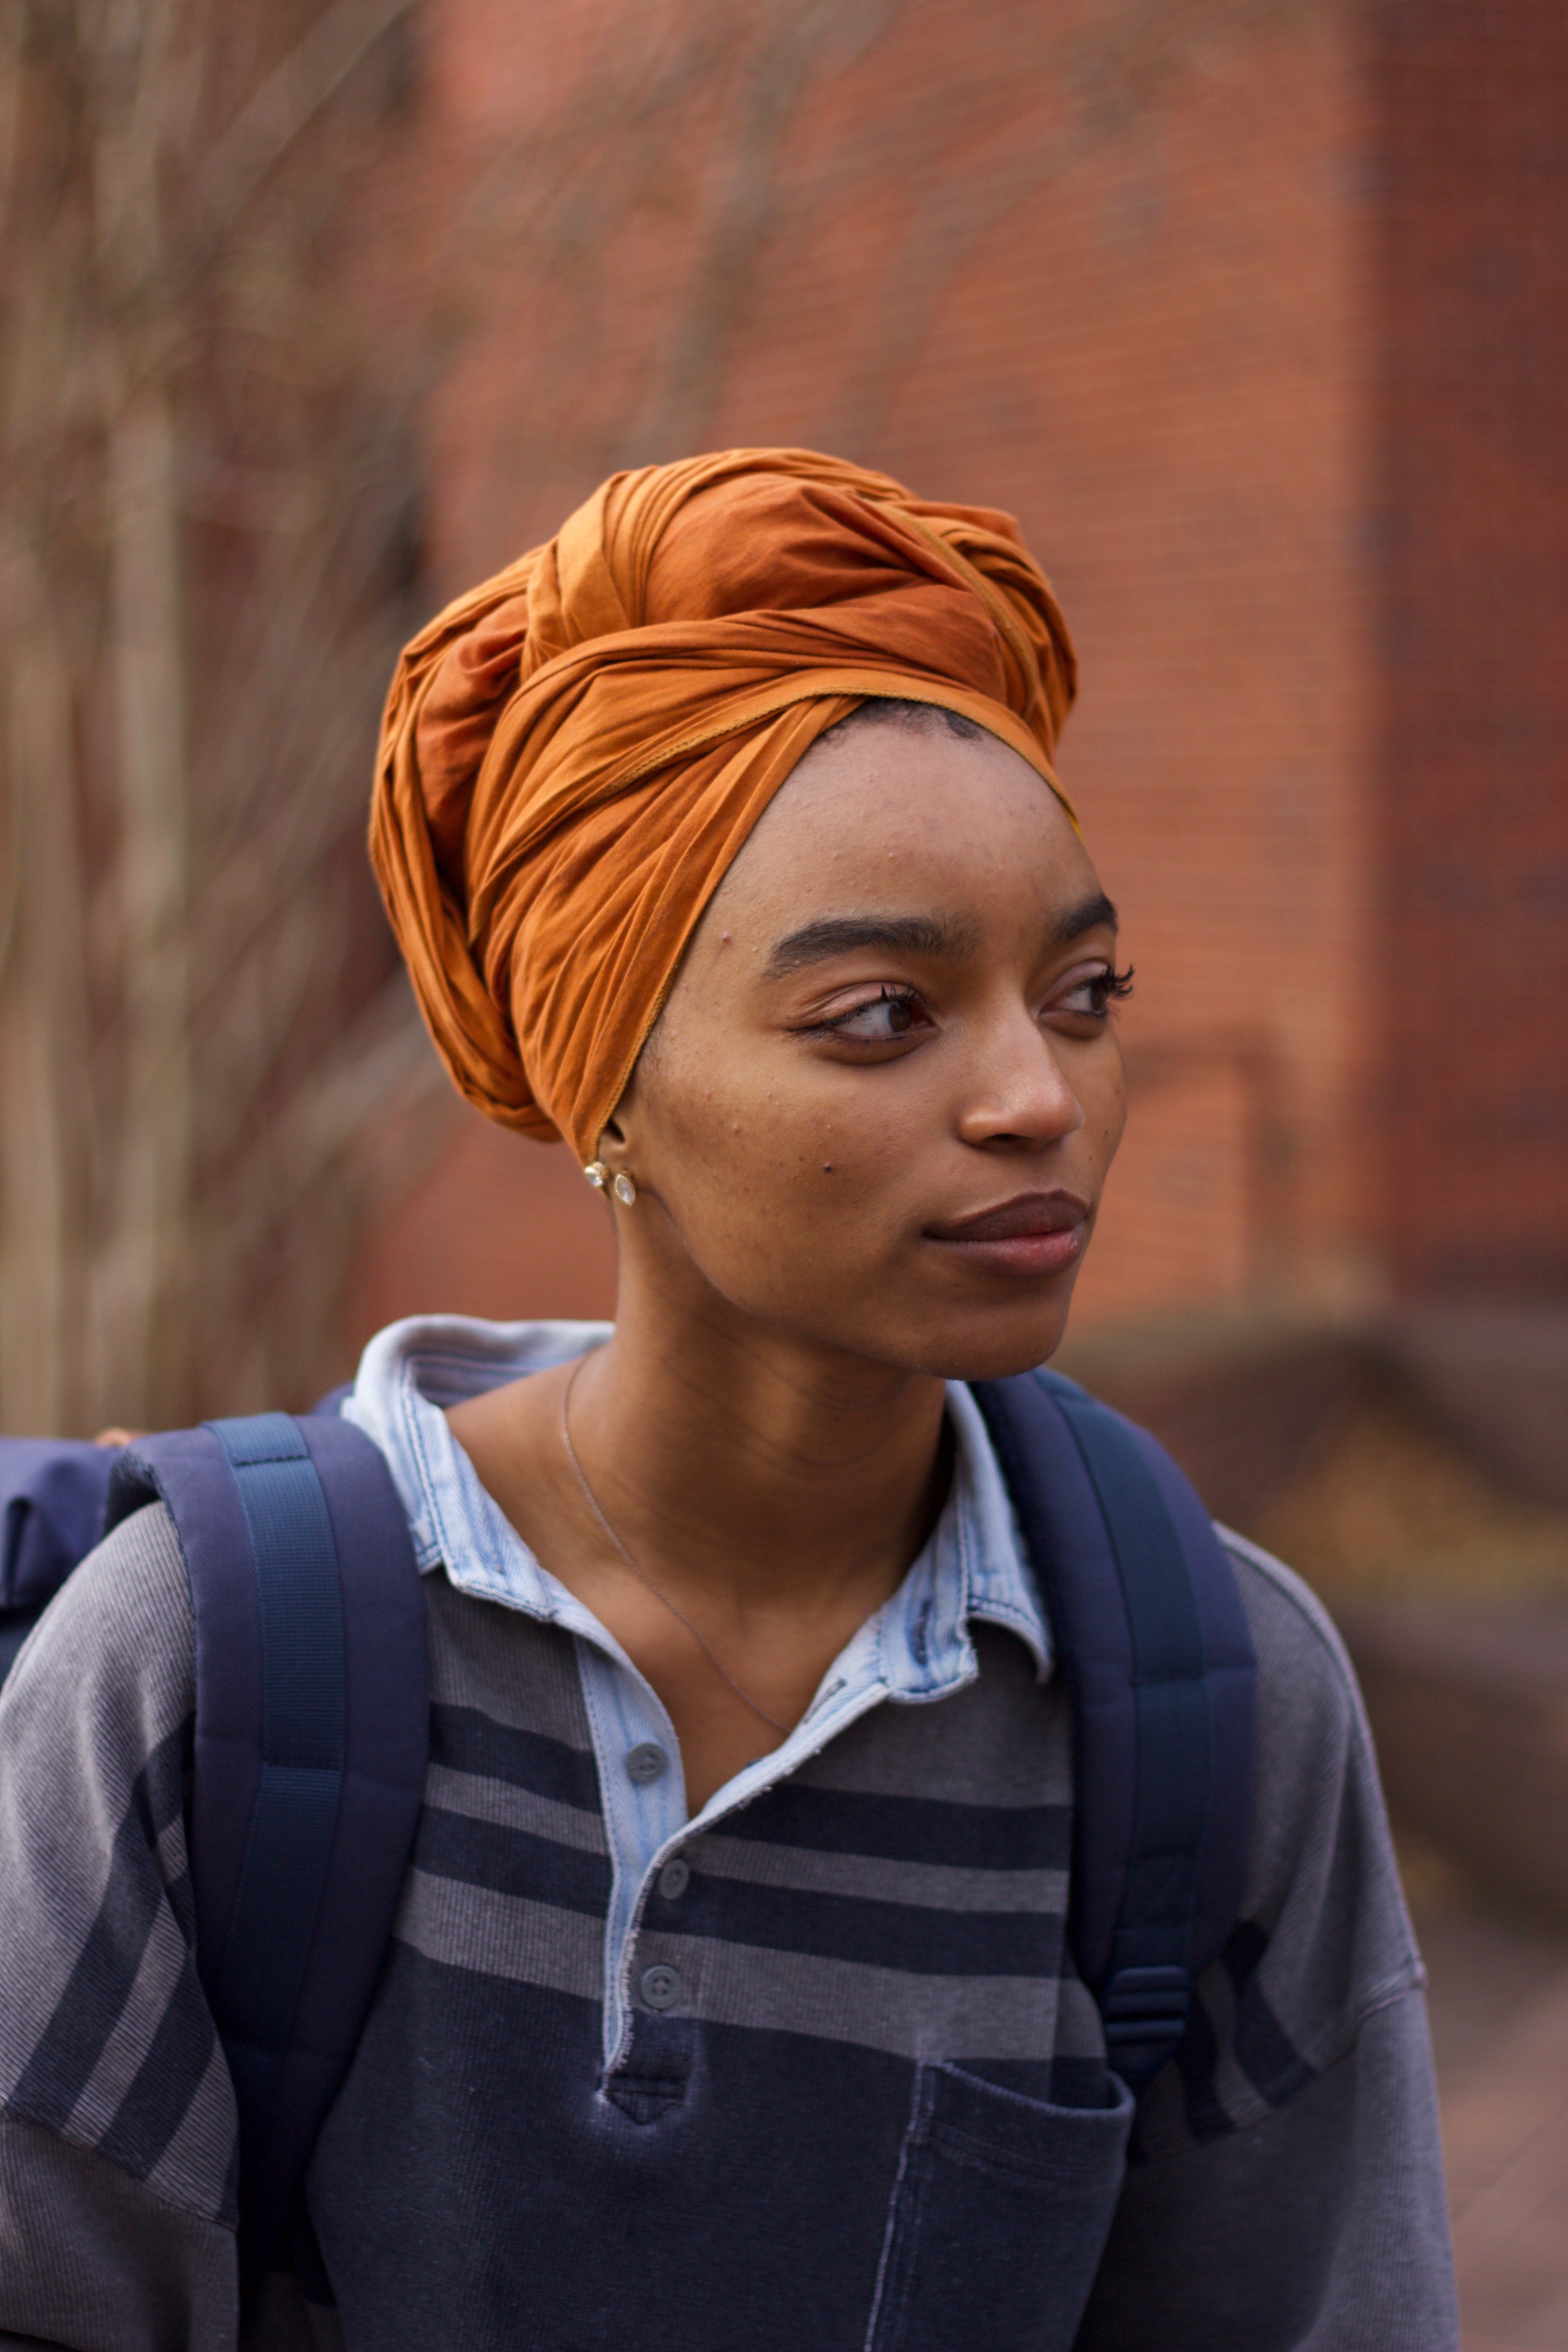 person wearing an orange-colored head scarf, grey and blue-colored polo shirt and blue-colored backpack looks off to the side. The background is a tree without leaves and a brick building